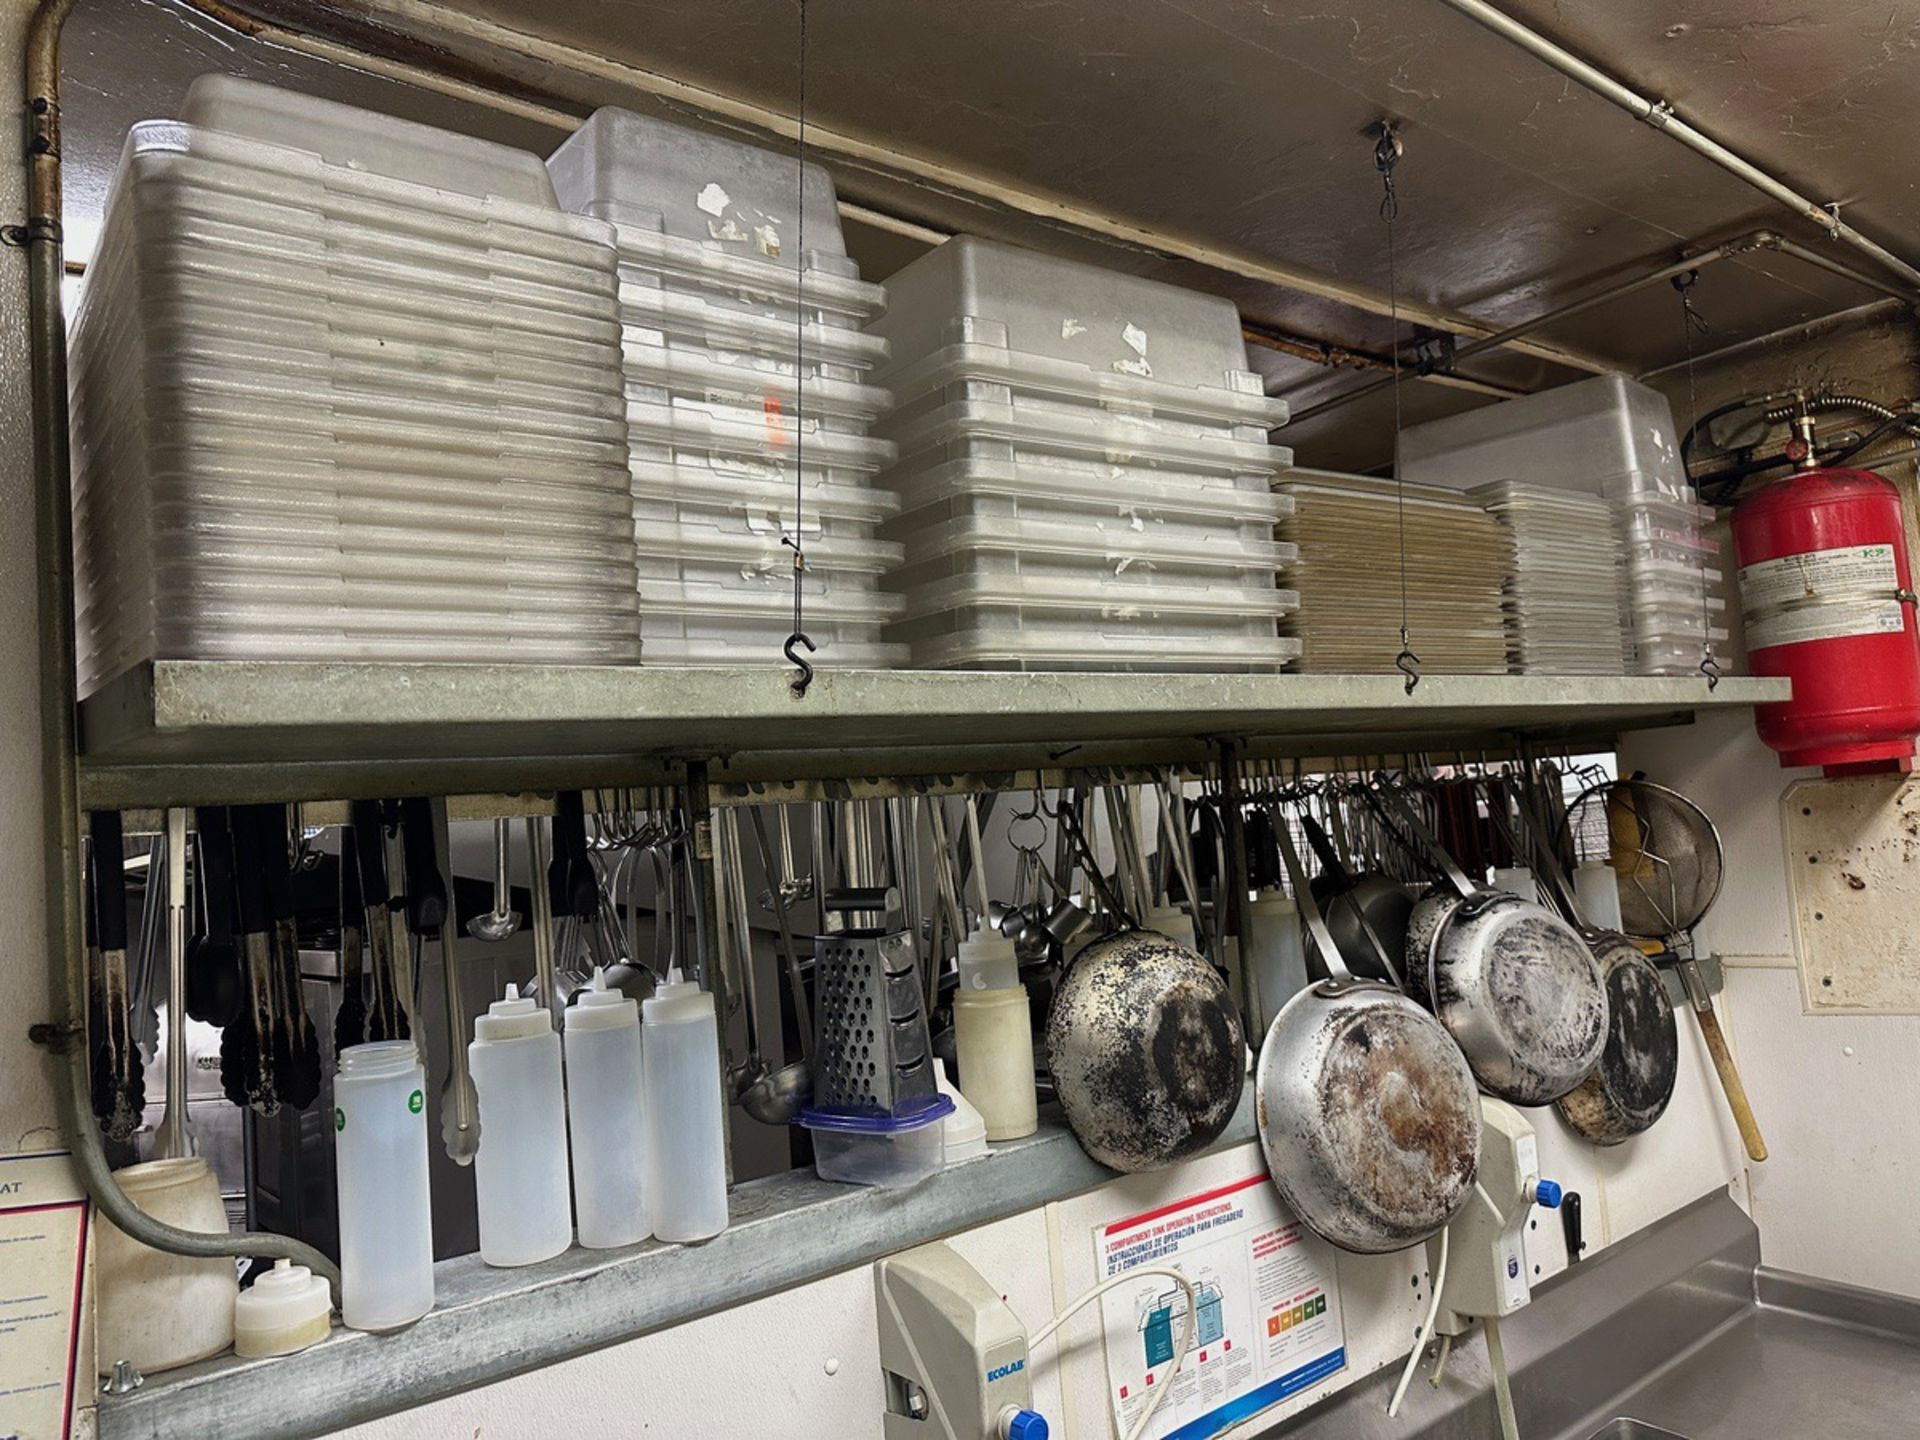 Lot of Utensils and Large Cambros, Lexons and Pans - Subj to Bulk | Rig Fee $75 - Image 2 of 2